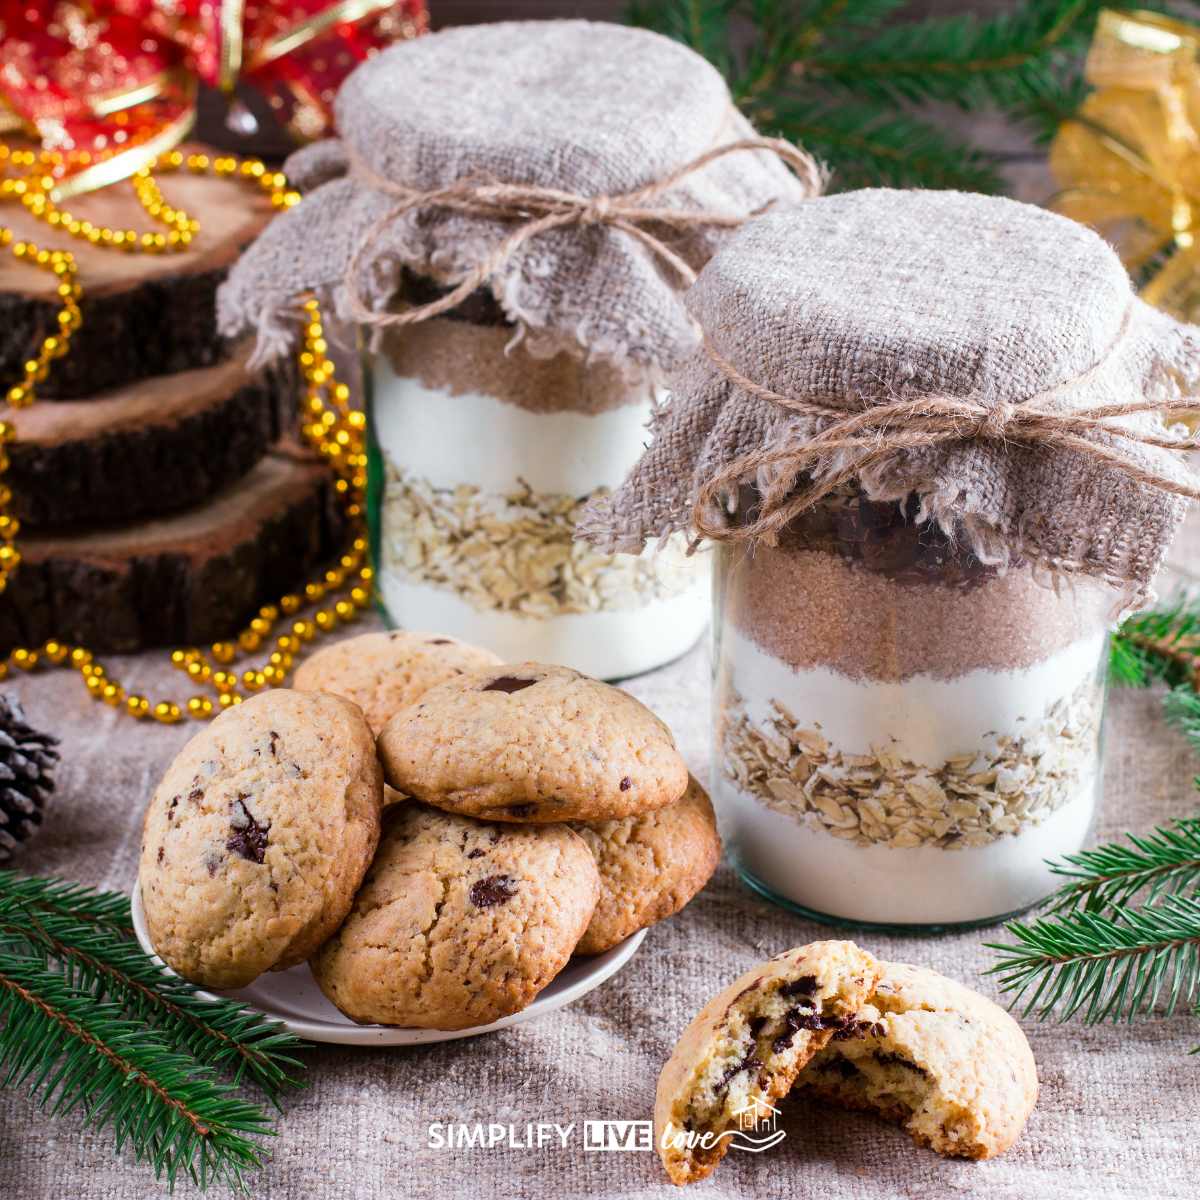 christmas cookies mix in a jar with chocolate chip cookies on a plate in foreground